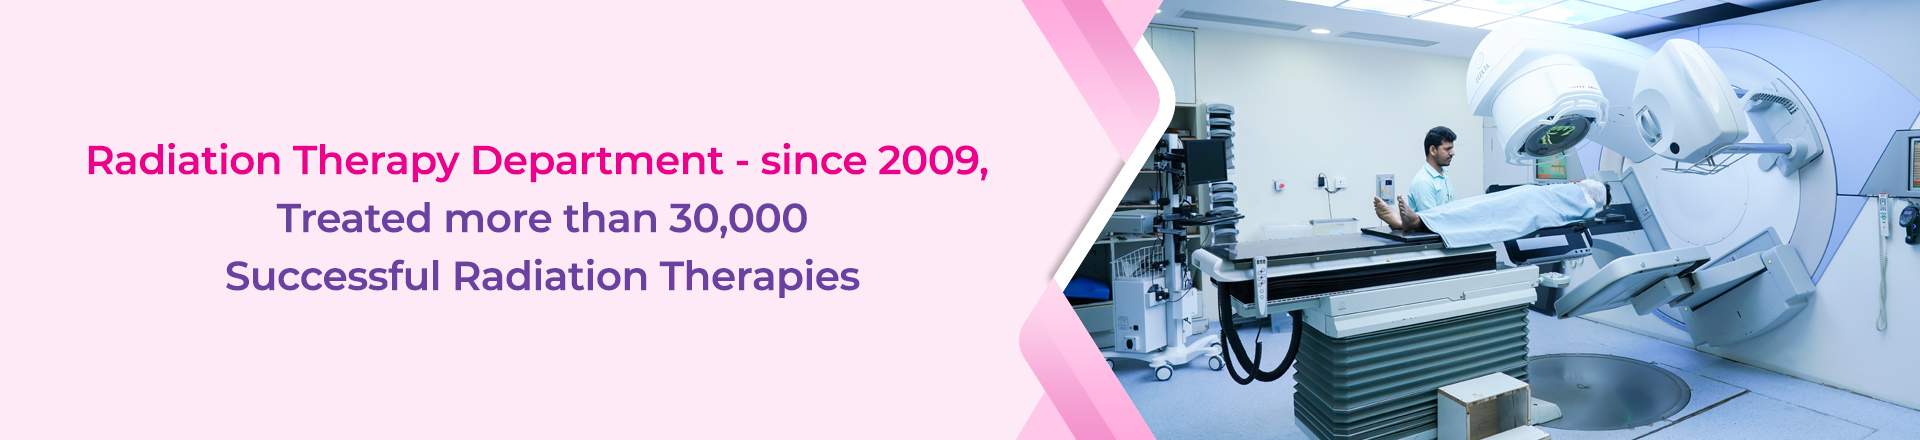 Radiation therapy department since 2000.